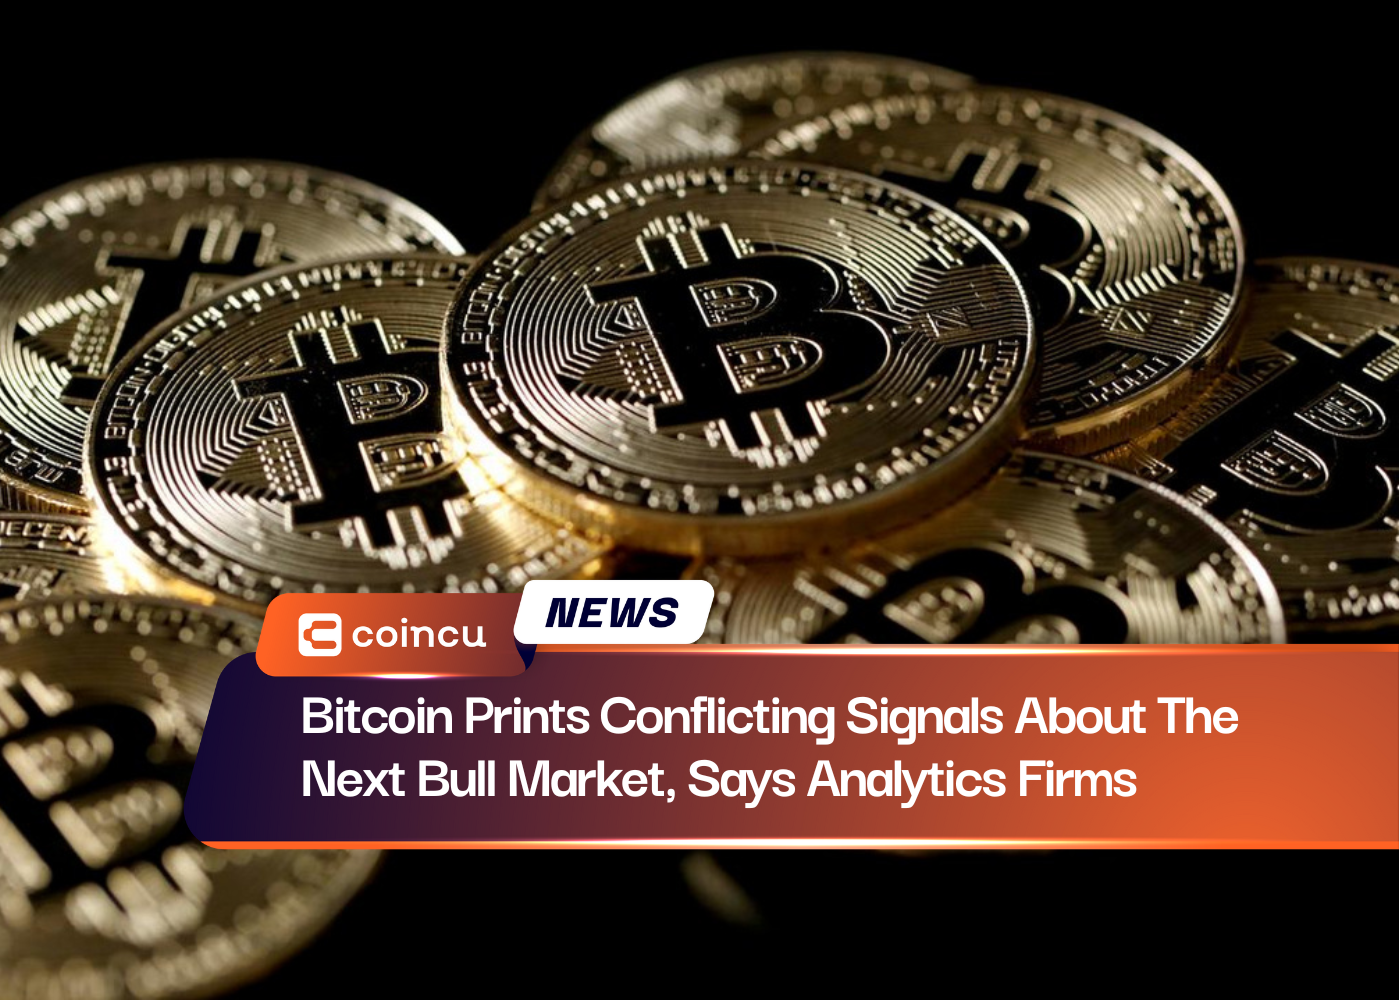 Bitcoin Prints Conflicting Signals About The Next Bull Market, Says Analytics Firms